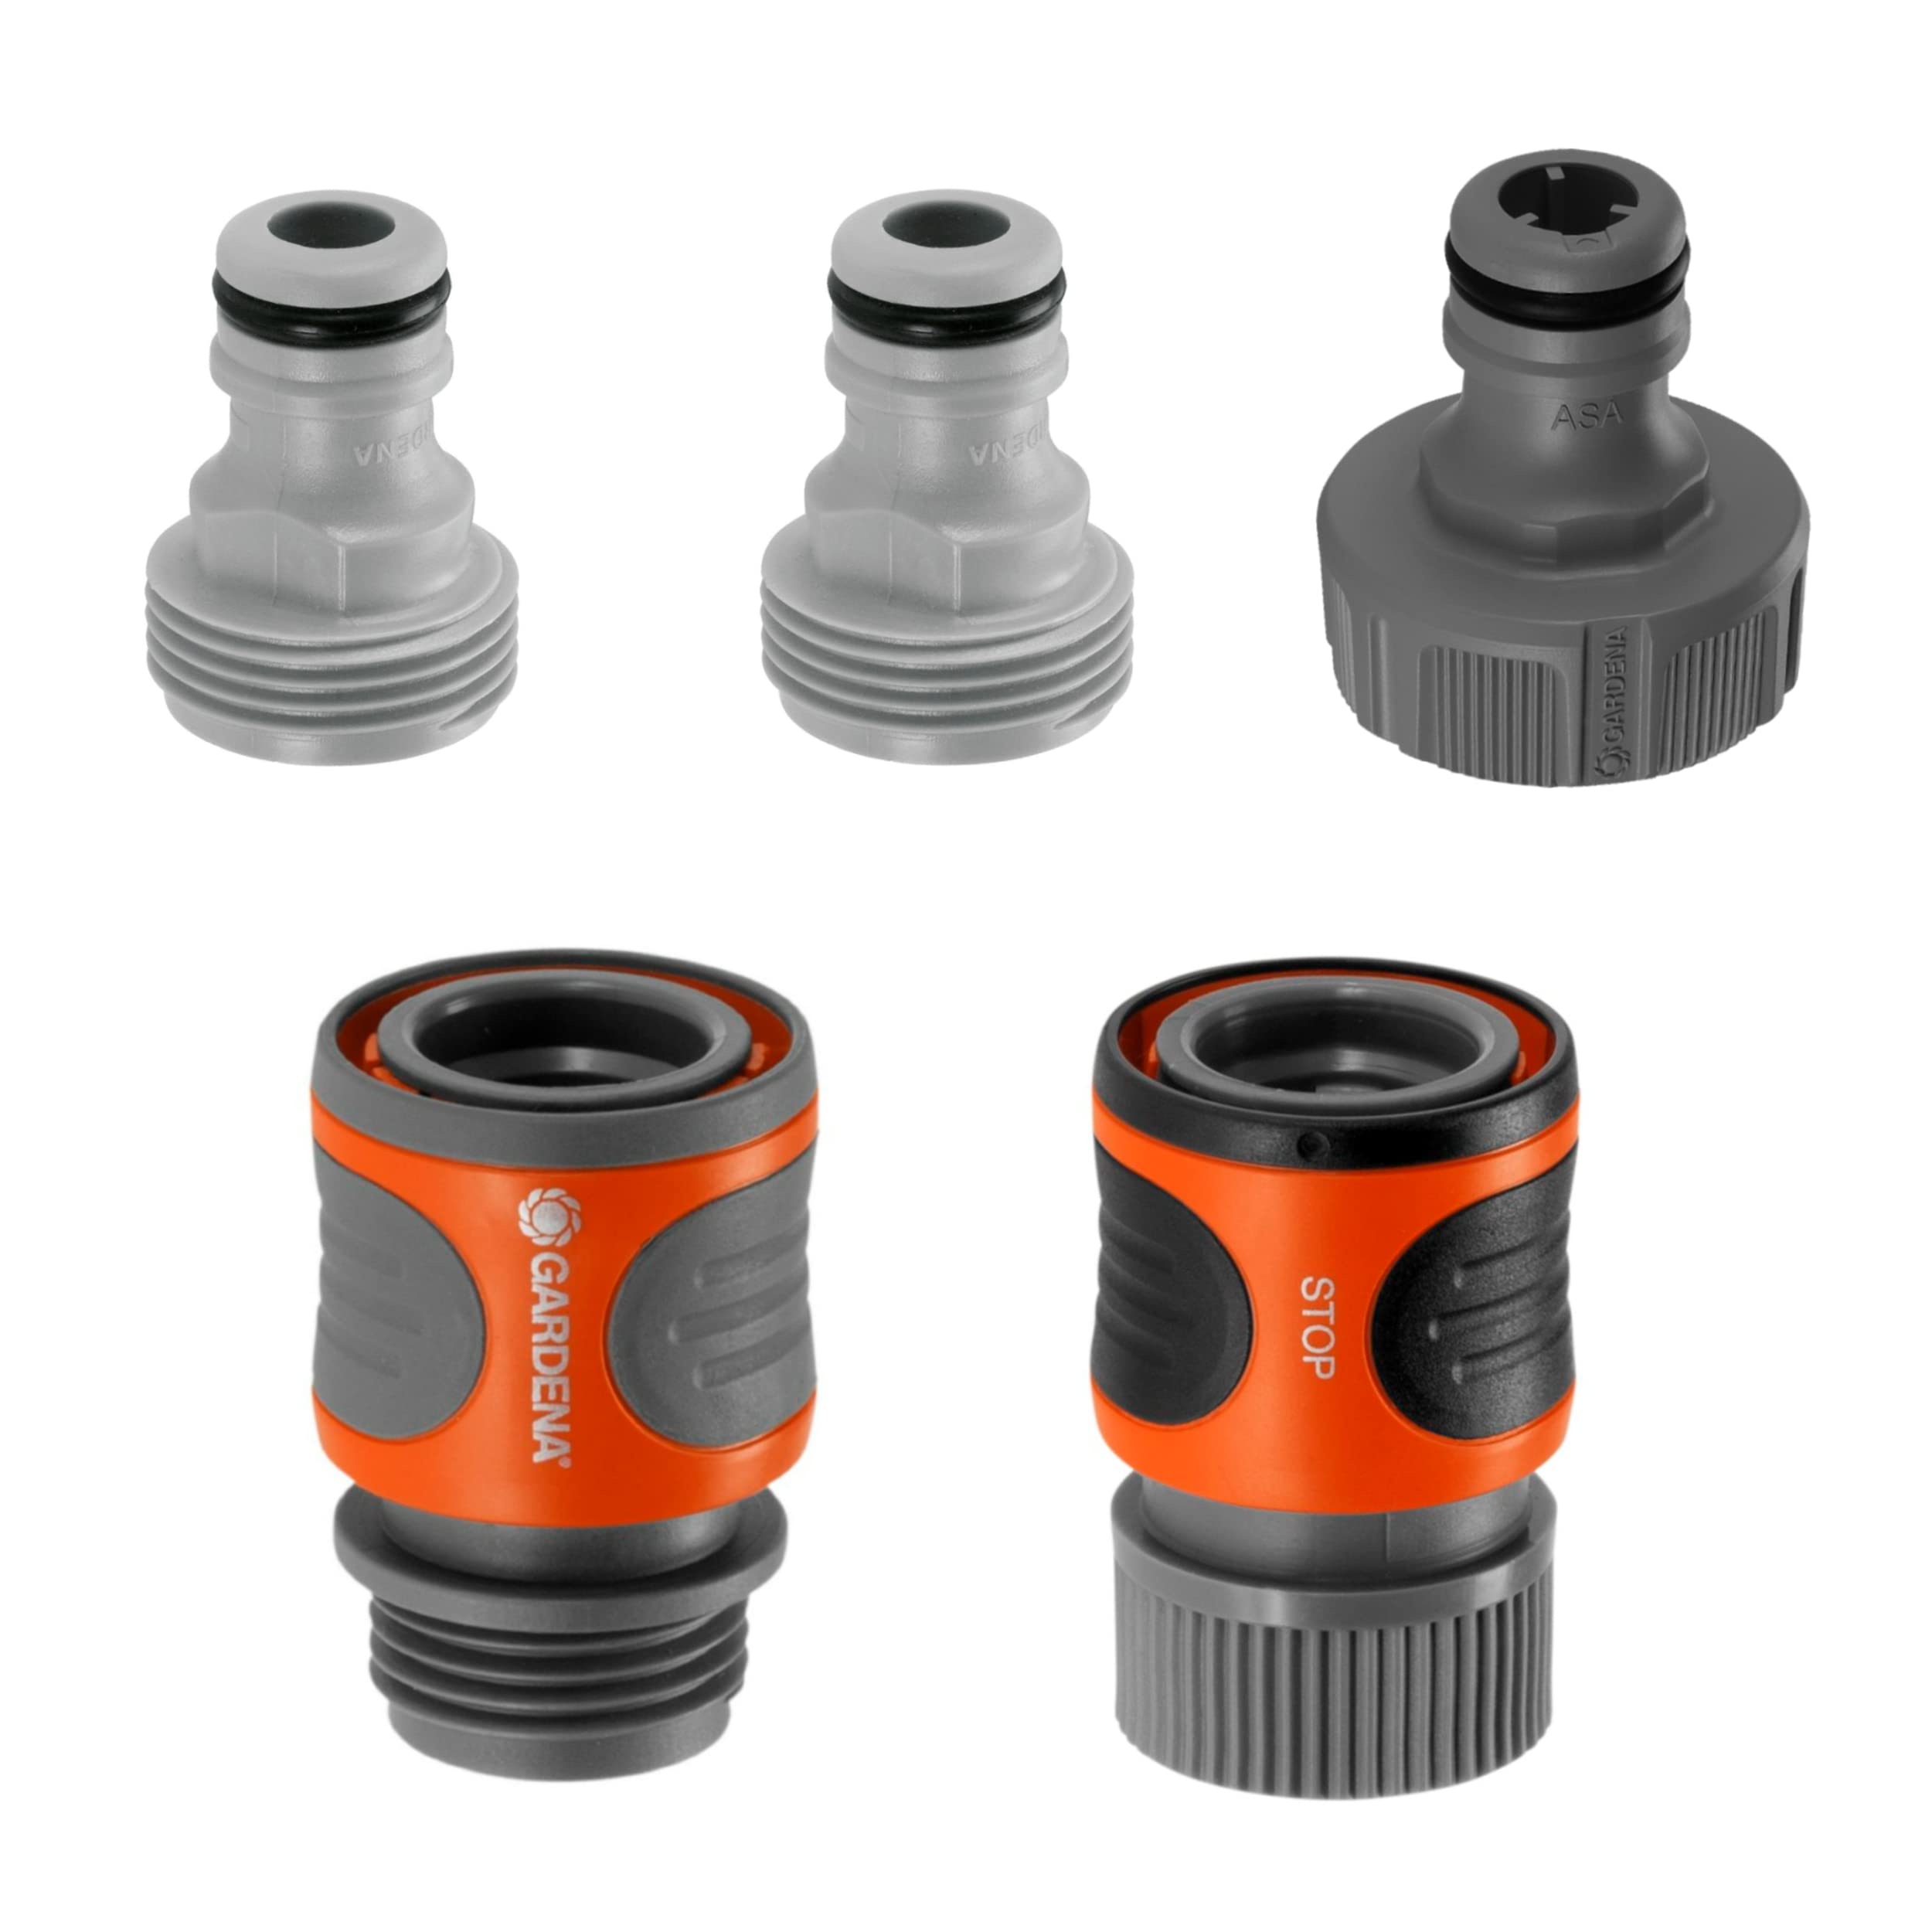 GARDENA 36004 5 Piece Quick Connector Starter Set, For any 5/8 Inch or 1/2 Inch Garden Hose, Sprinkler or Spray Nozzle, Made In Germany